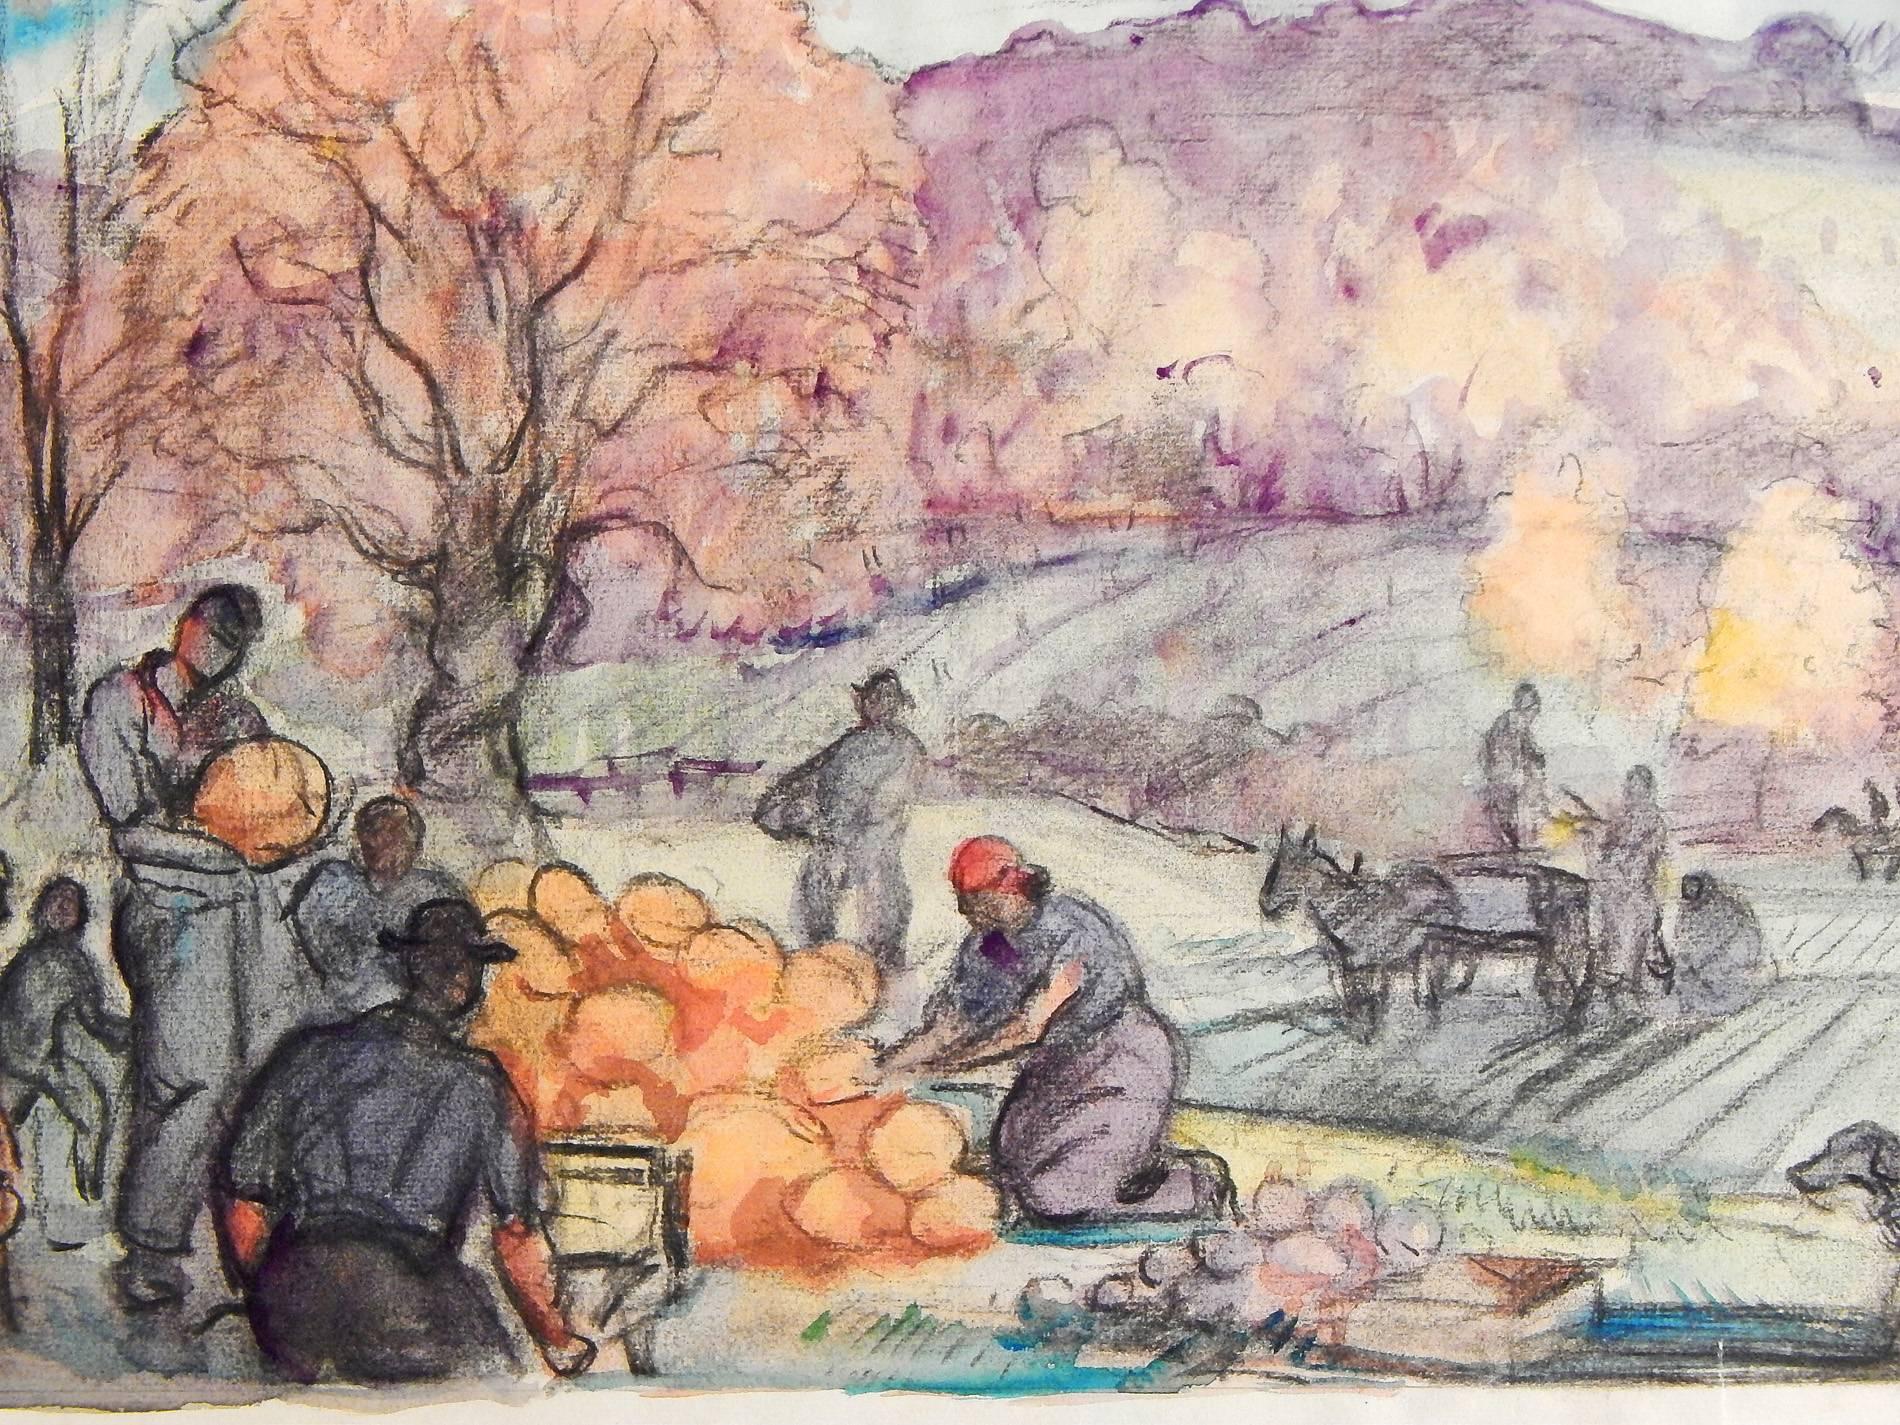 Highly atmospheric and drenched in lovely color, this drawing showing farmers piling pumpkins and men walking off to the hunt, set off by the purple hills behind, was made by Aiden Lassell Ripley, probably as a preparatory piece for his famous 